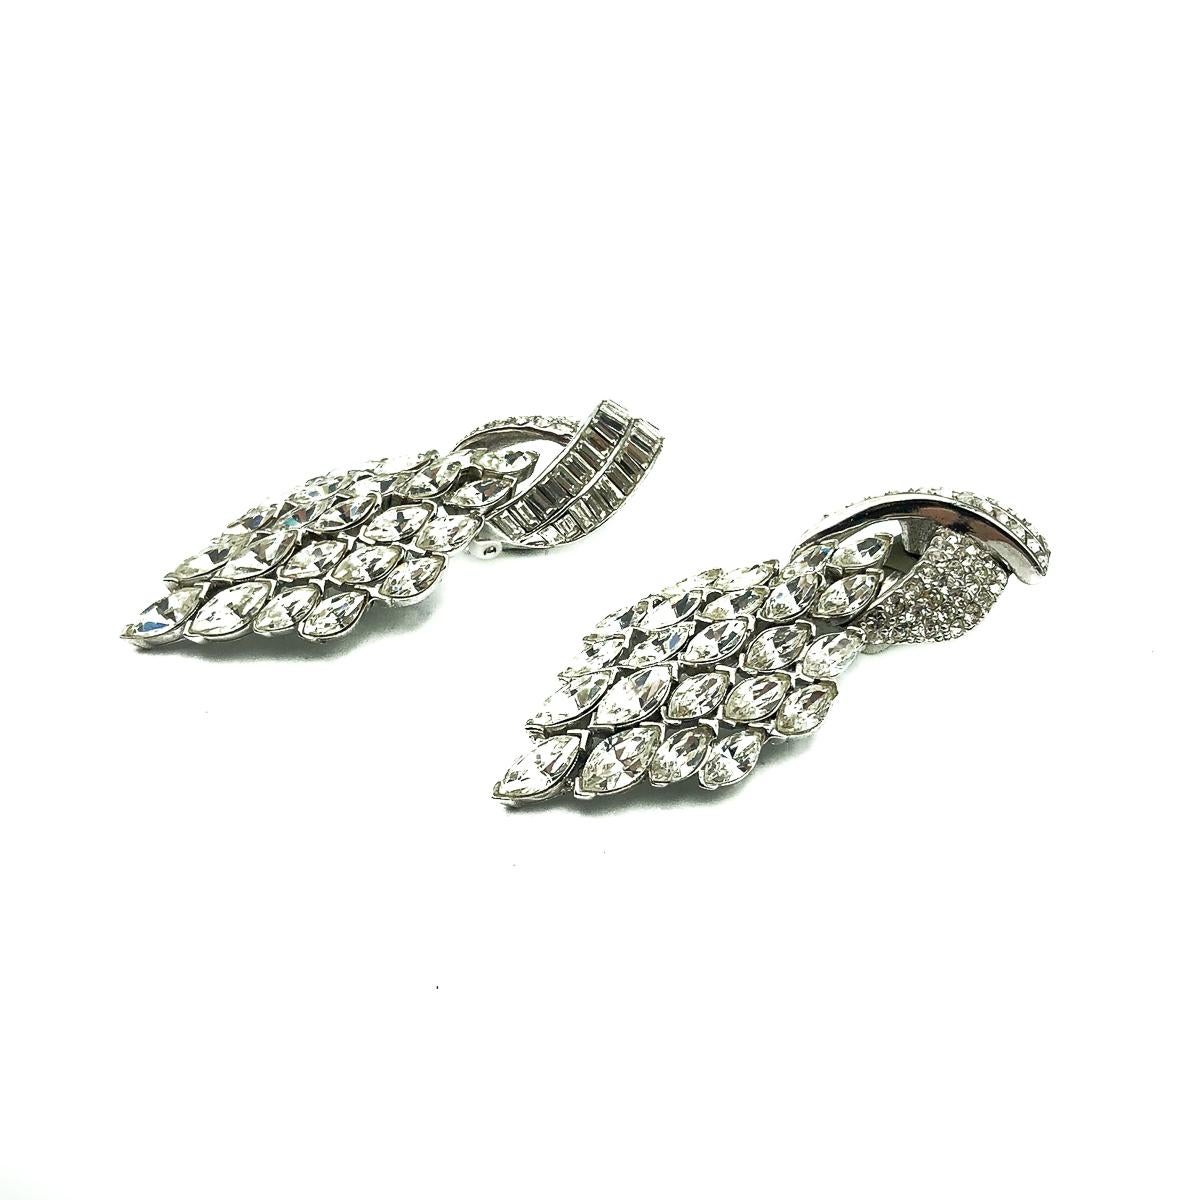 Vintage Ciner Deco Earrings. A captivating pair of Vintage Ciner Art Deco Cocktail Earrings from the 1980s. Adorable, timeless art deco revival earrings encrusted with wall to wall shimmering rhinestones. Crafted in rhodium plated metal. Clip